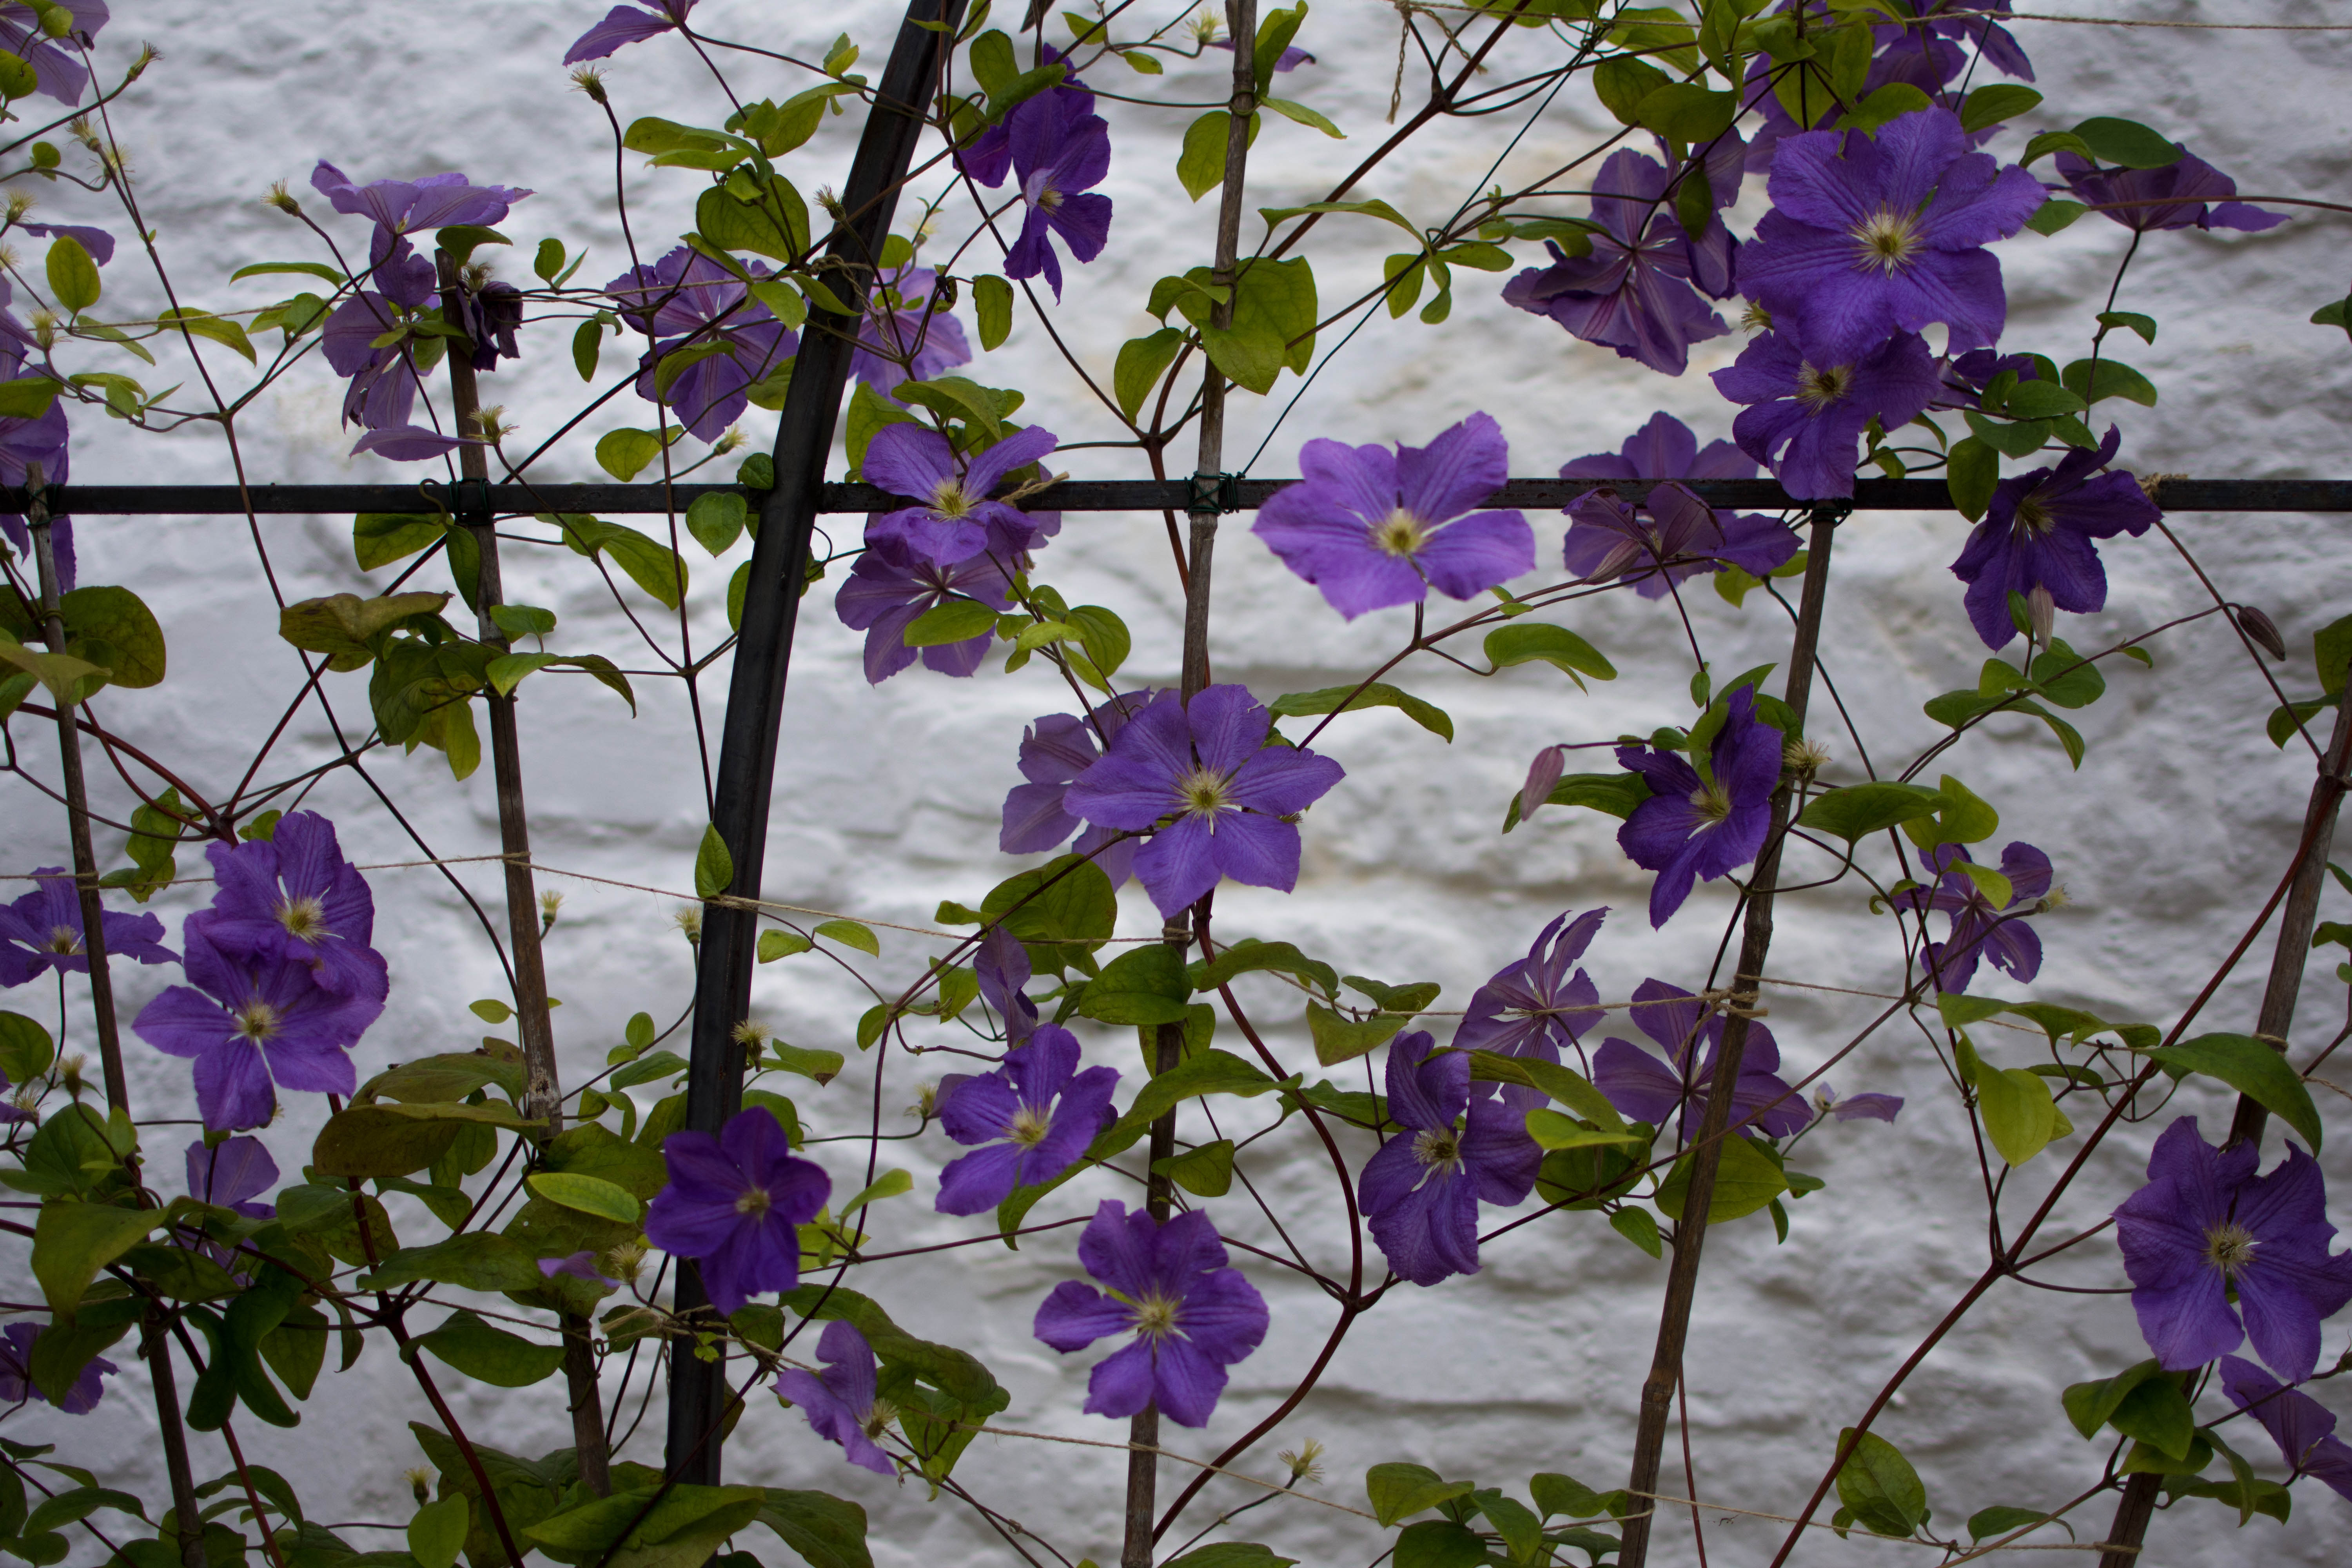 A landscape image of purple clematis flowers growing against a white wall which is slightly blurred in the background. The flowers are on thin stems with green leaves. The purple flowers are at different angles and facing in different directions as if they are rambling about. The image makes me happy.